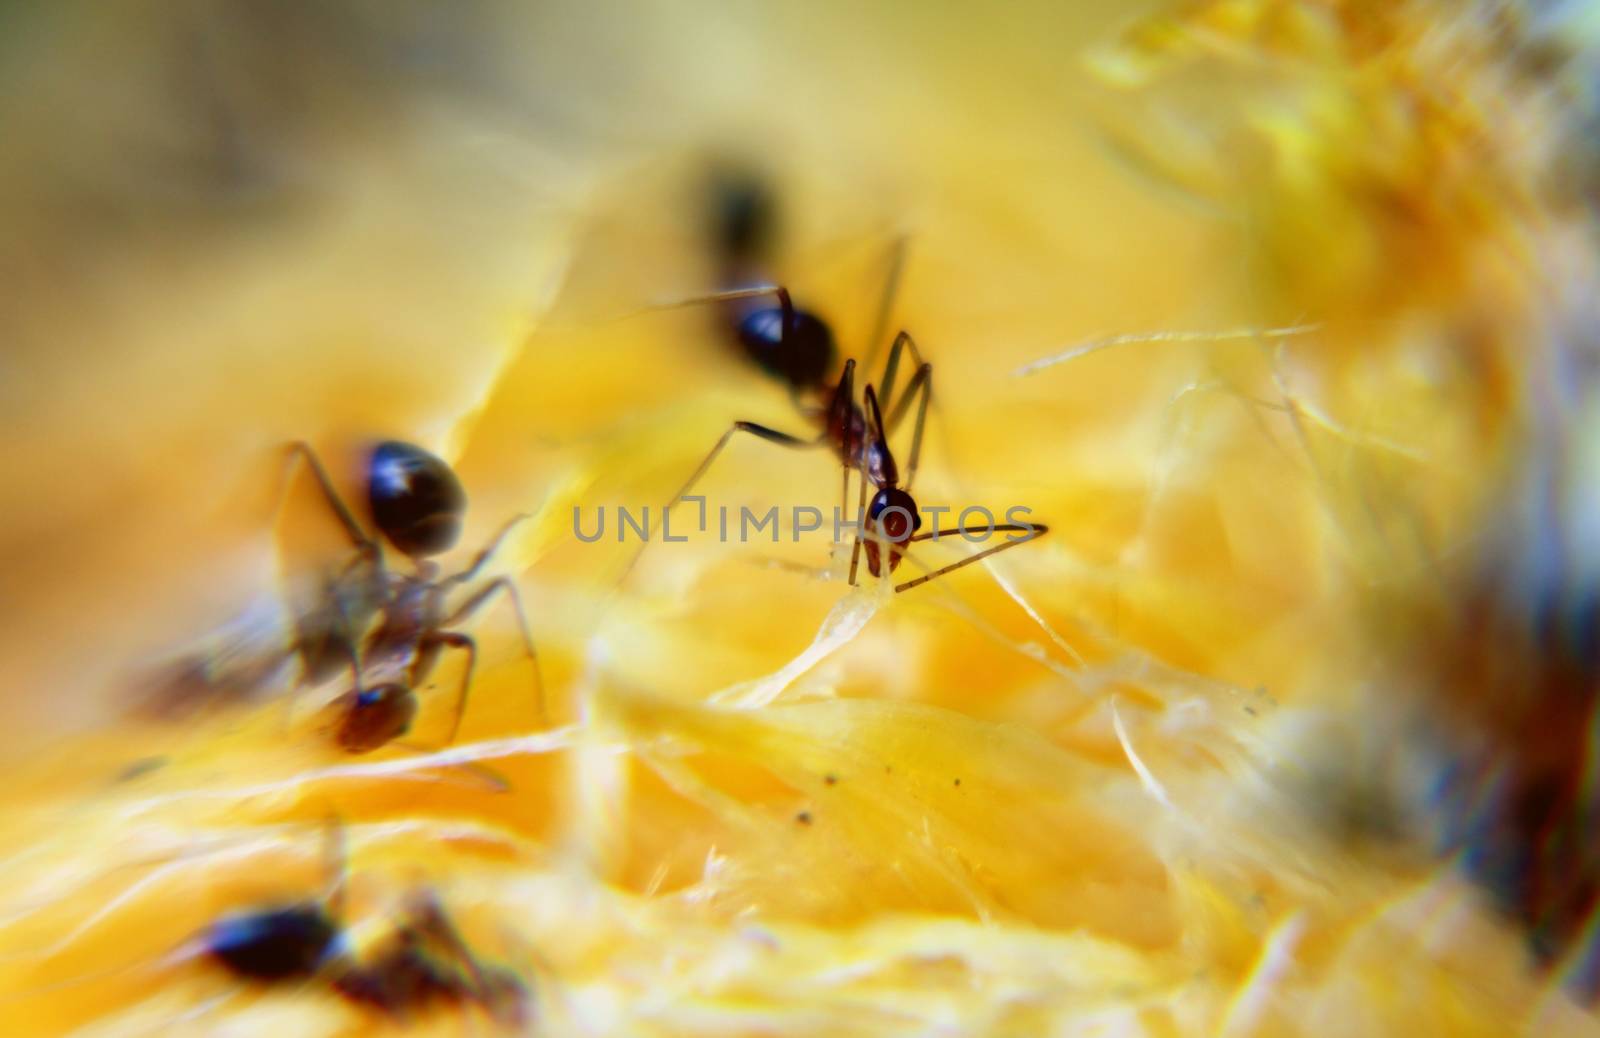 Ants swarming for food from ripe fruit by razihusin